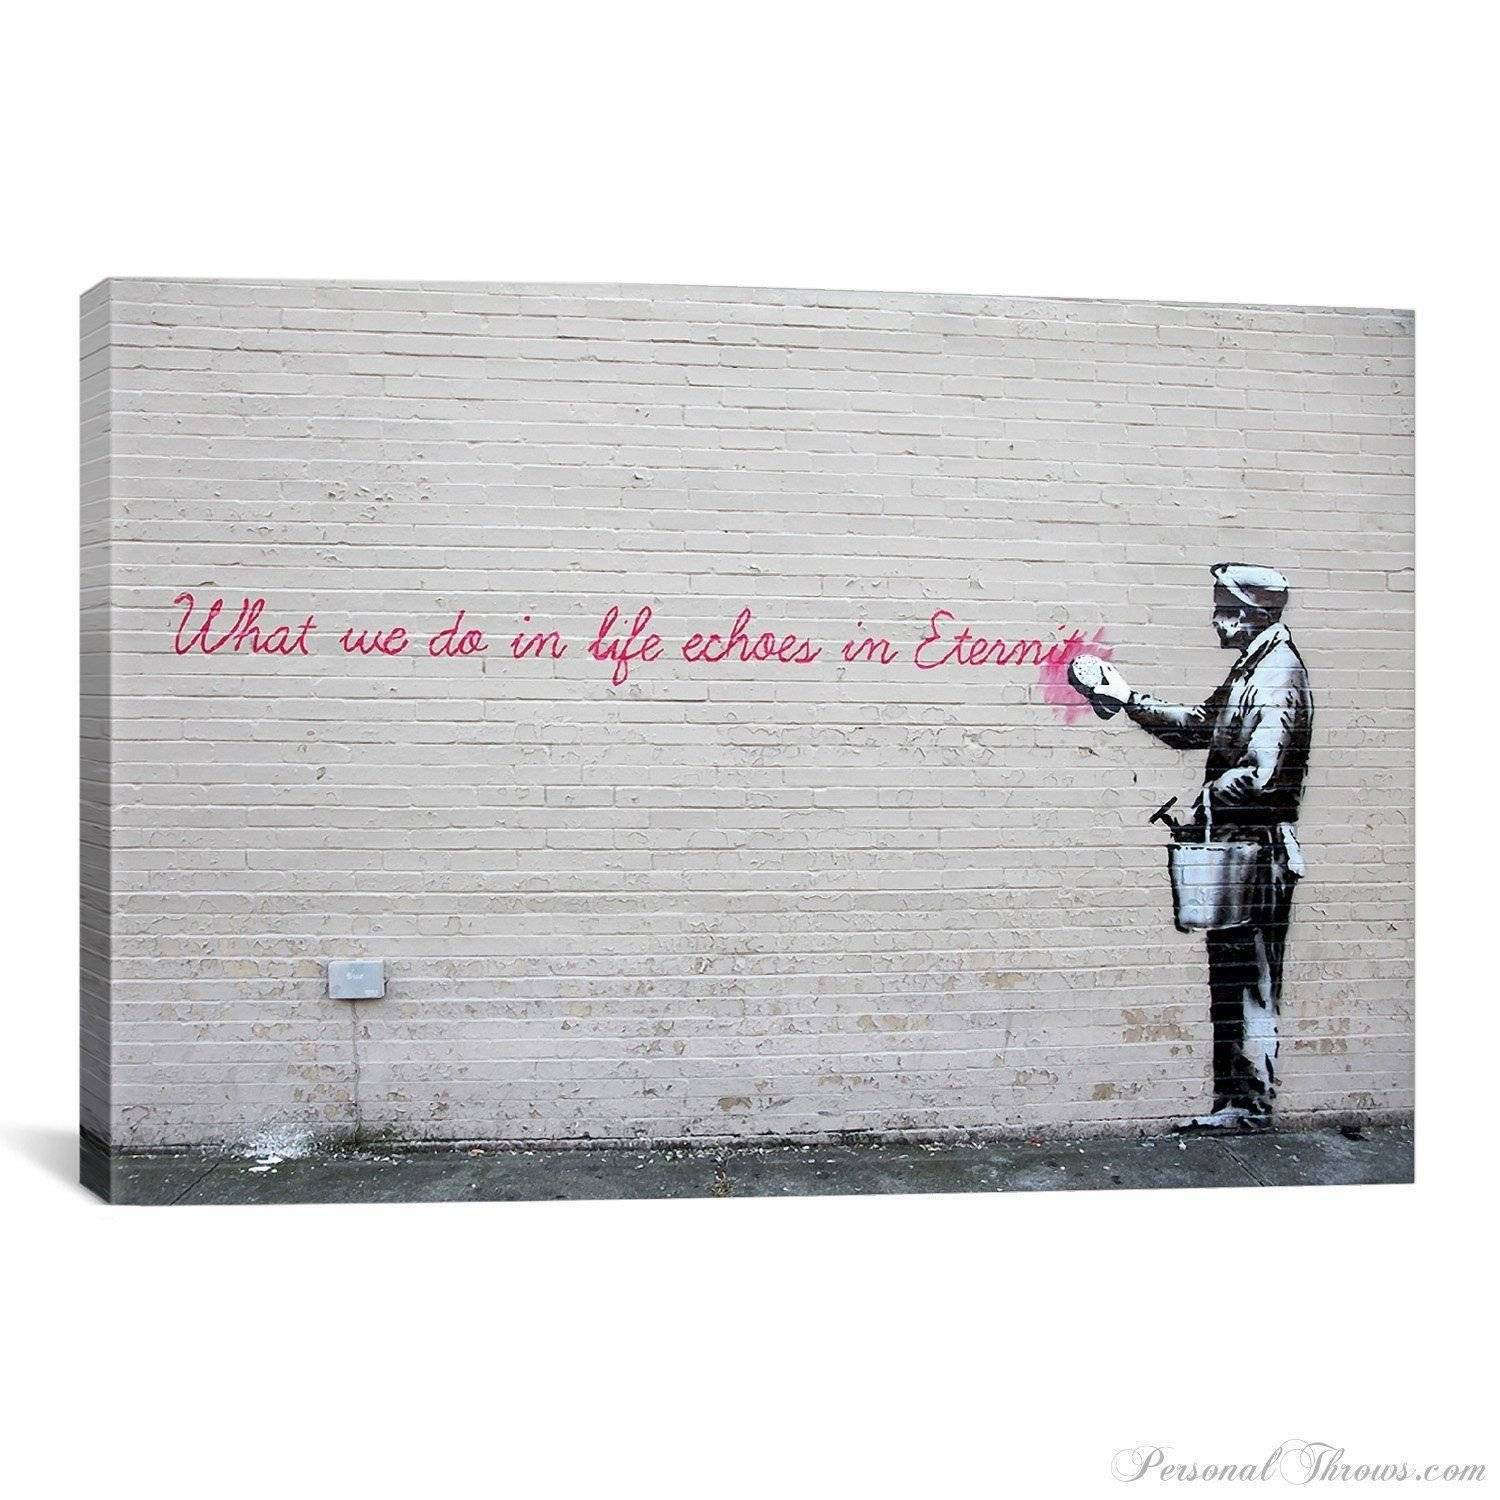 Banksy, "What We Do in Life Echoes in Eternity" Canvas Gallery Wrap Print